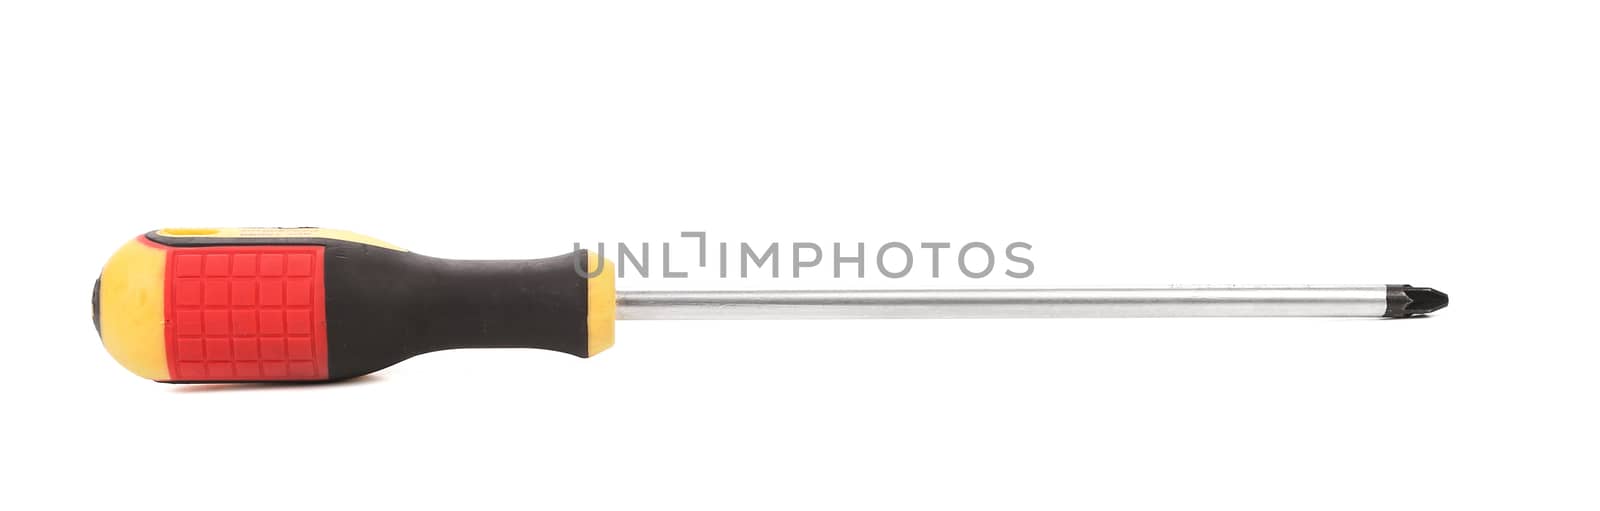 Screwdriver close up. Horizontal. Isolated on a white background.